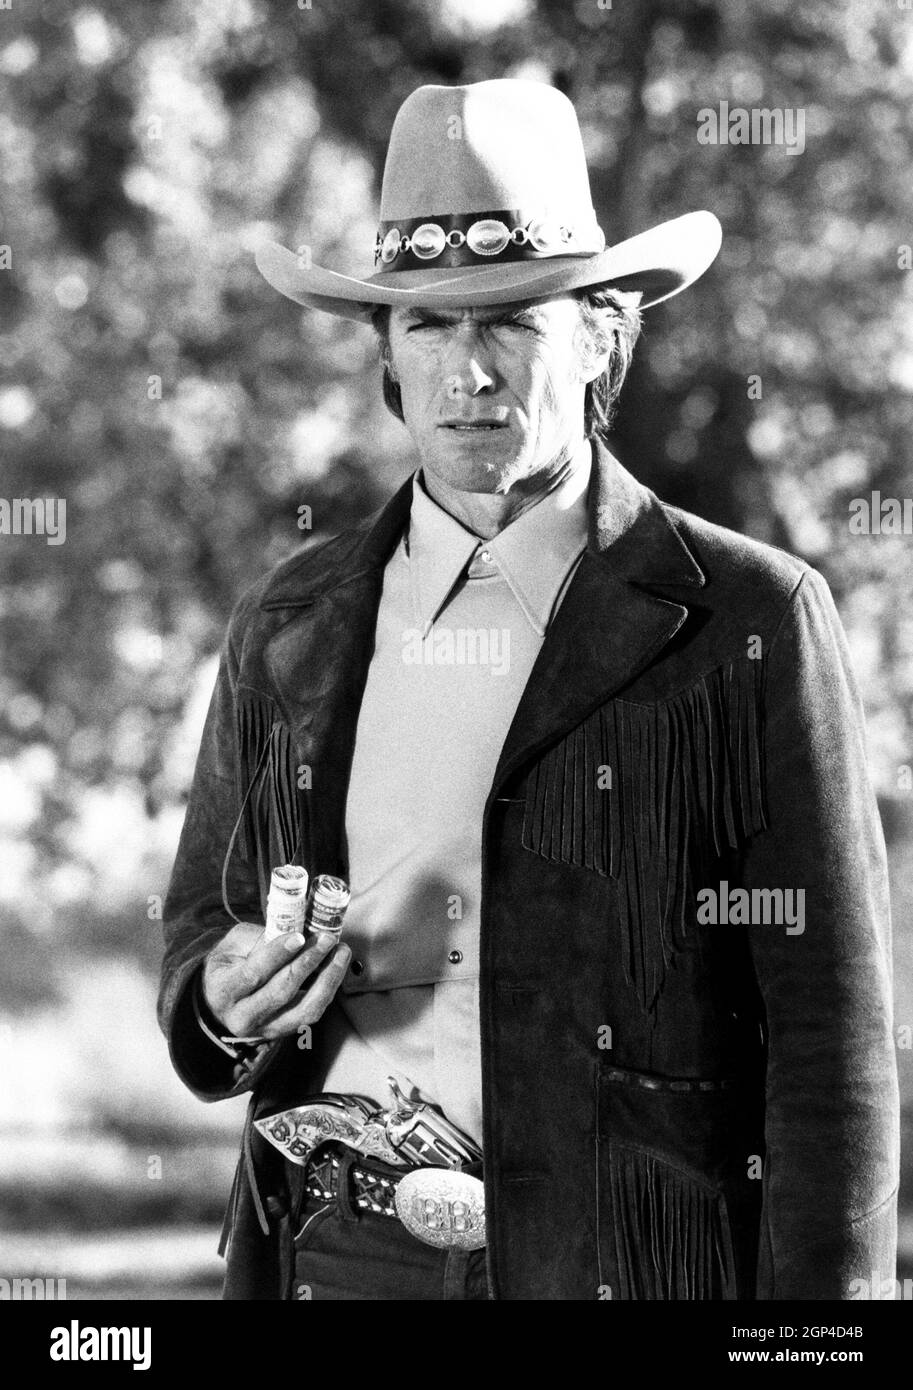 BRONCO BILLY, Clint Eastwood, 1980. ©Warner Bros./courtesy Everett Collection Stock Photo